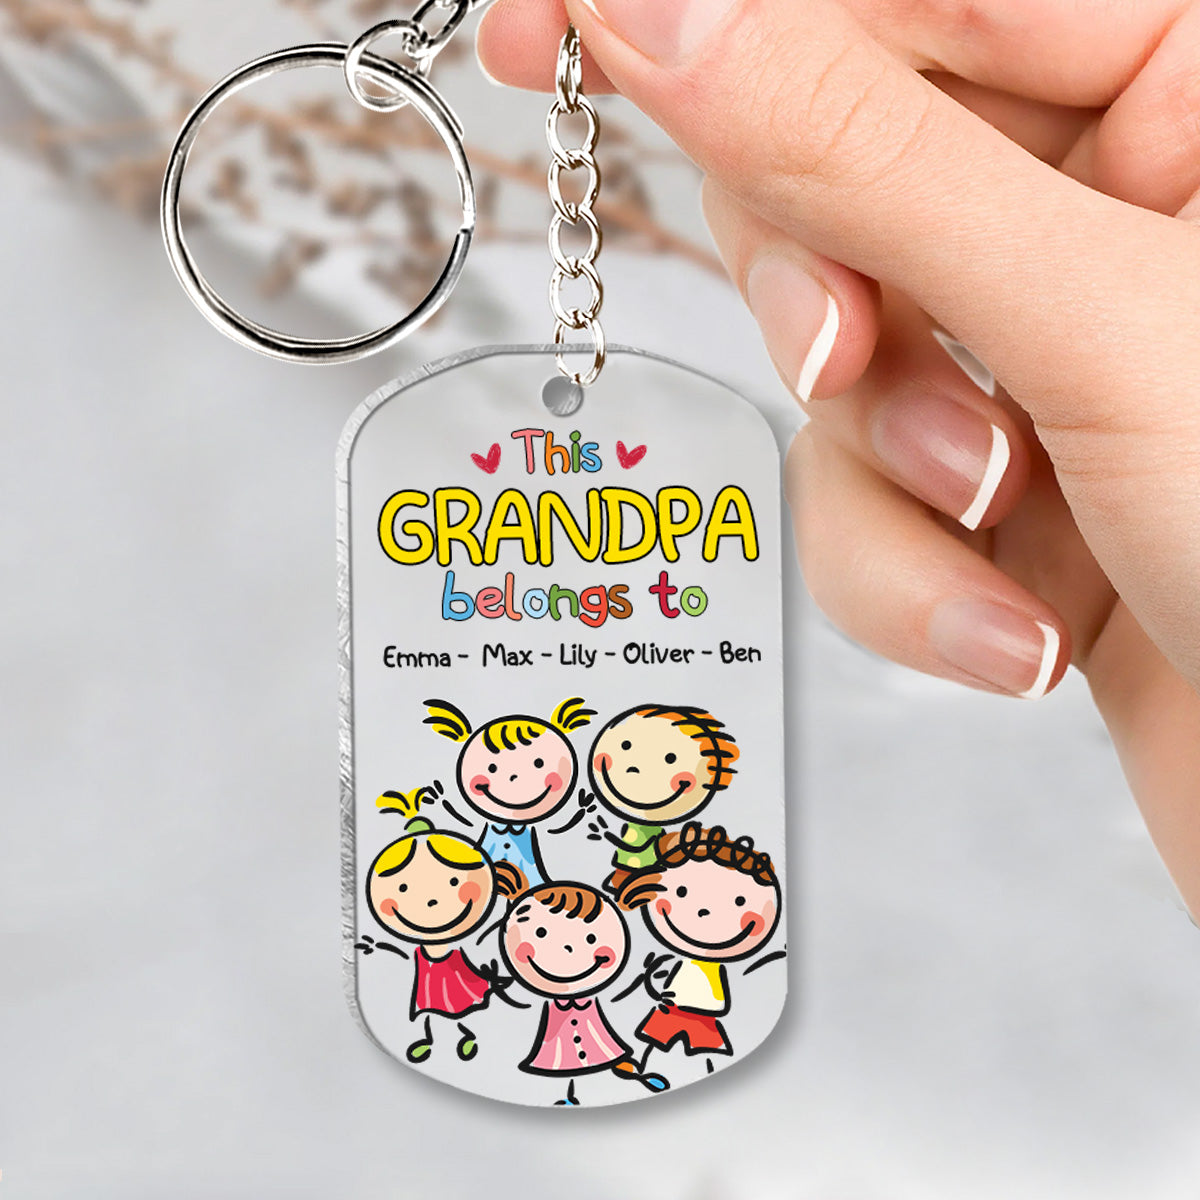 Disover This Grandpa Belongs To - Gift for grandpa, grandma, mom, dad, uncle, aunt, brother, sister - Personalized Keychain